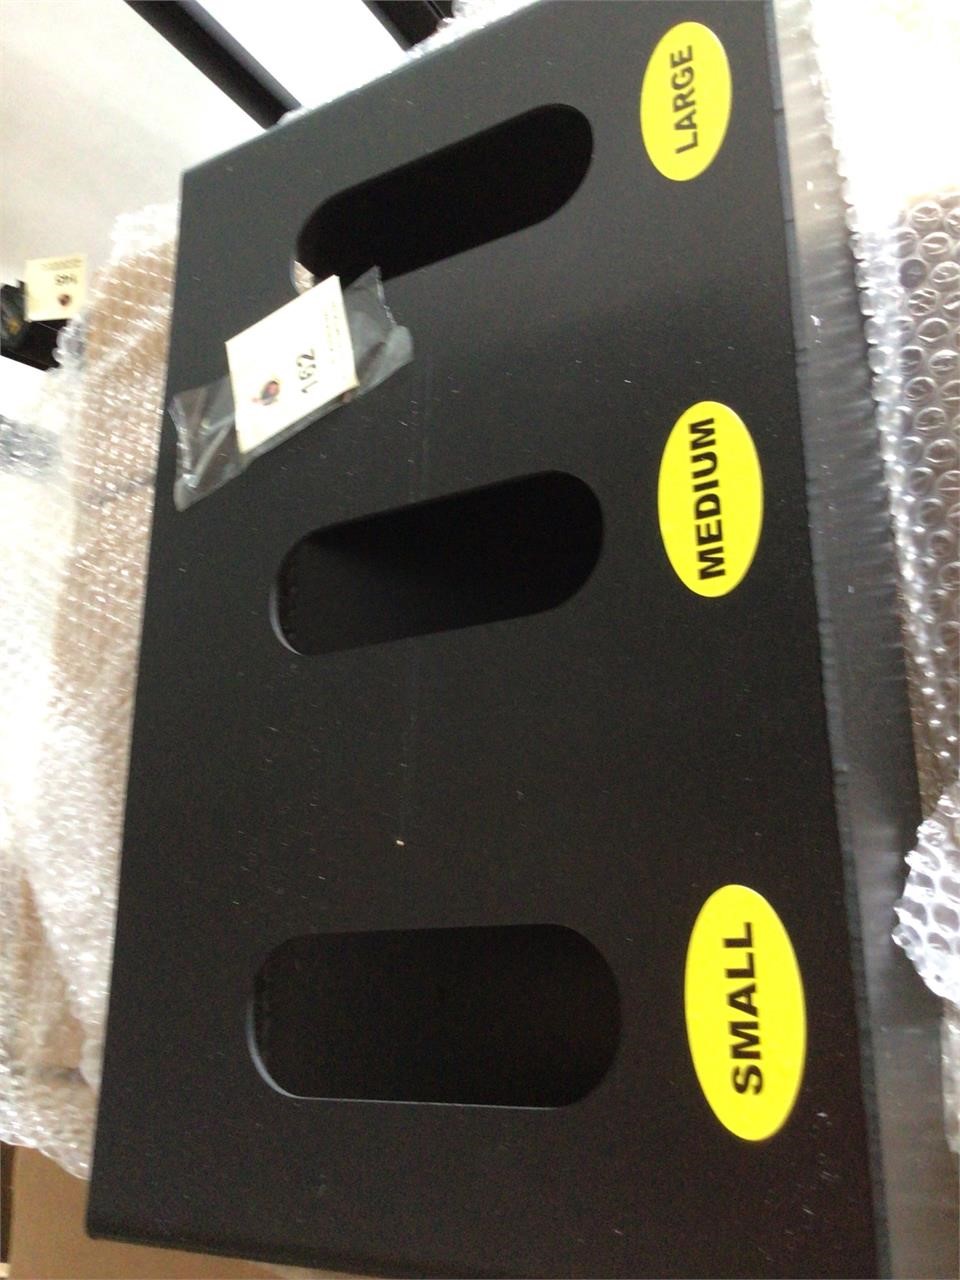 3 Glove dispenser boxes commercial New in box